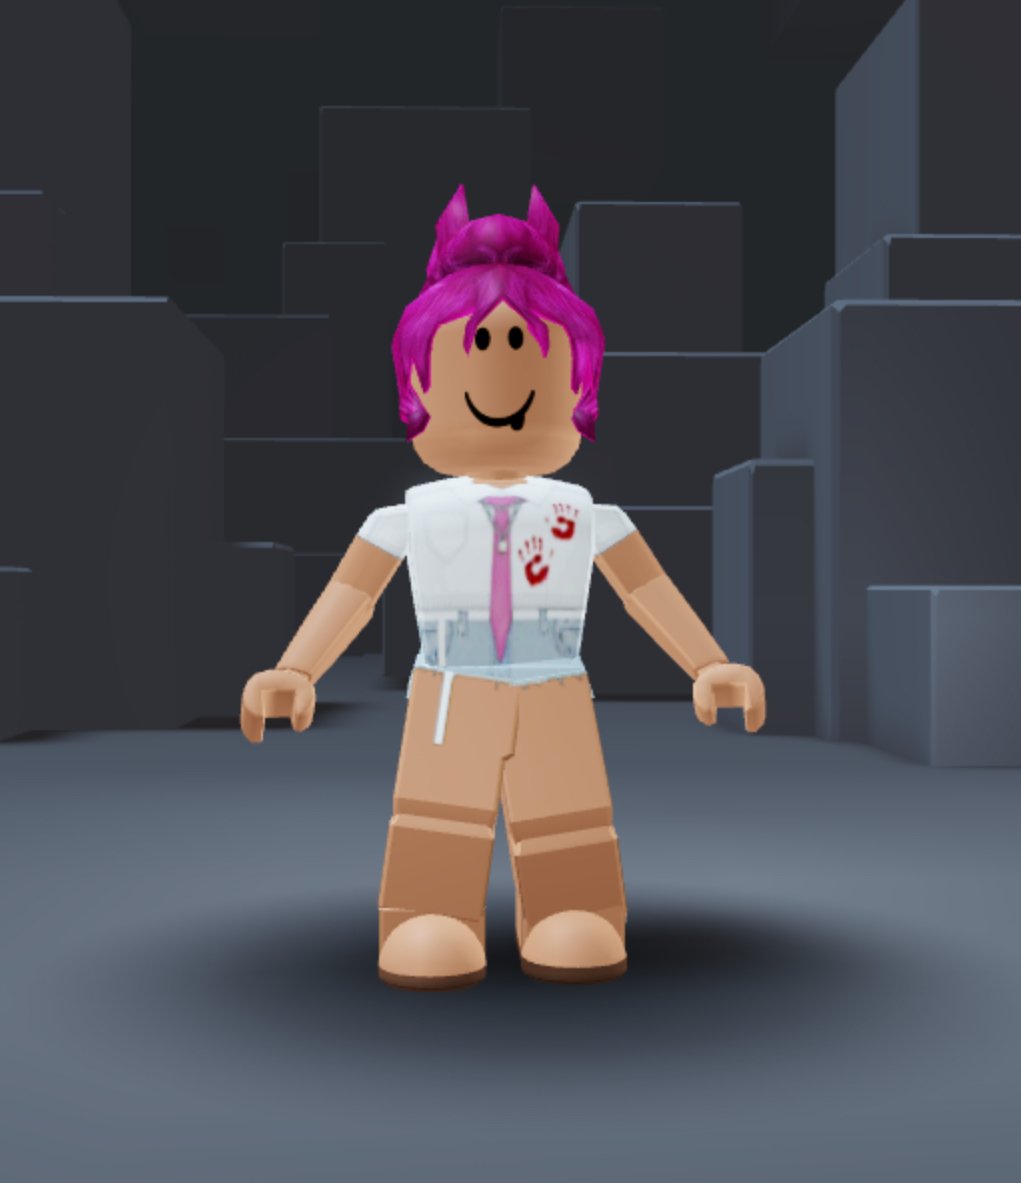 Www Robloxfits Com Roblox Fits - roblox outfit ideas free